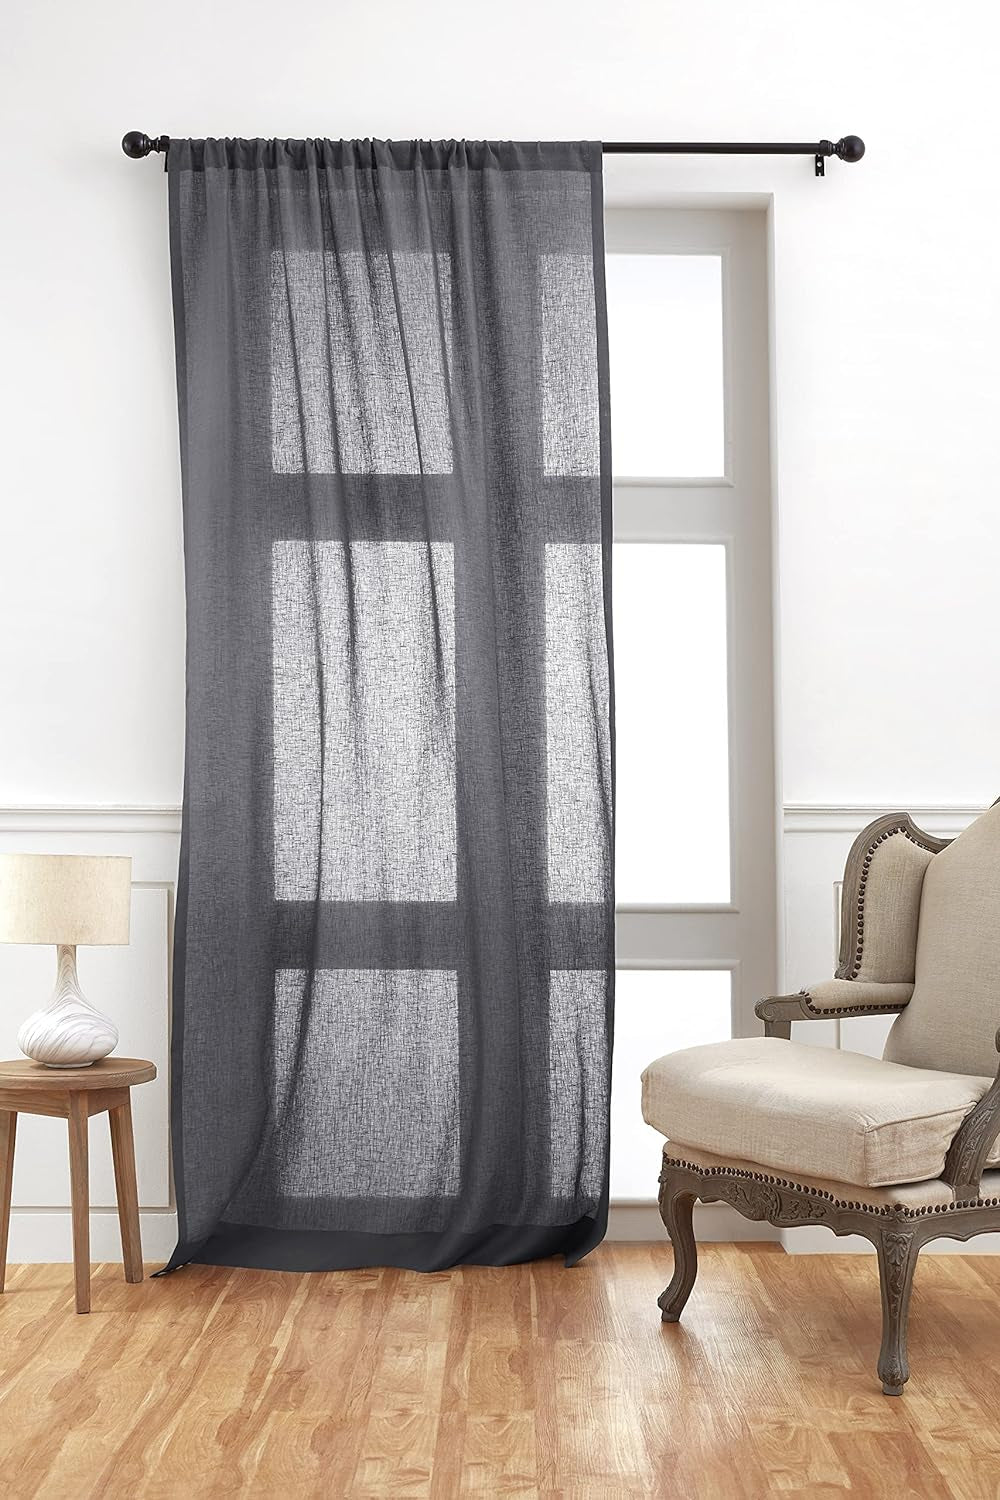 Solino Home Linen Sheer Curtain – 52 X 45 Inch Light Natural Rod Pocket Window Panel – 100% Pure Natural Fabric Curtain for Living Room, Indoor, Outdoor – Handcrafted from European Flax  Solino Home Charcoal 52 X 63 Inch 